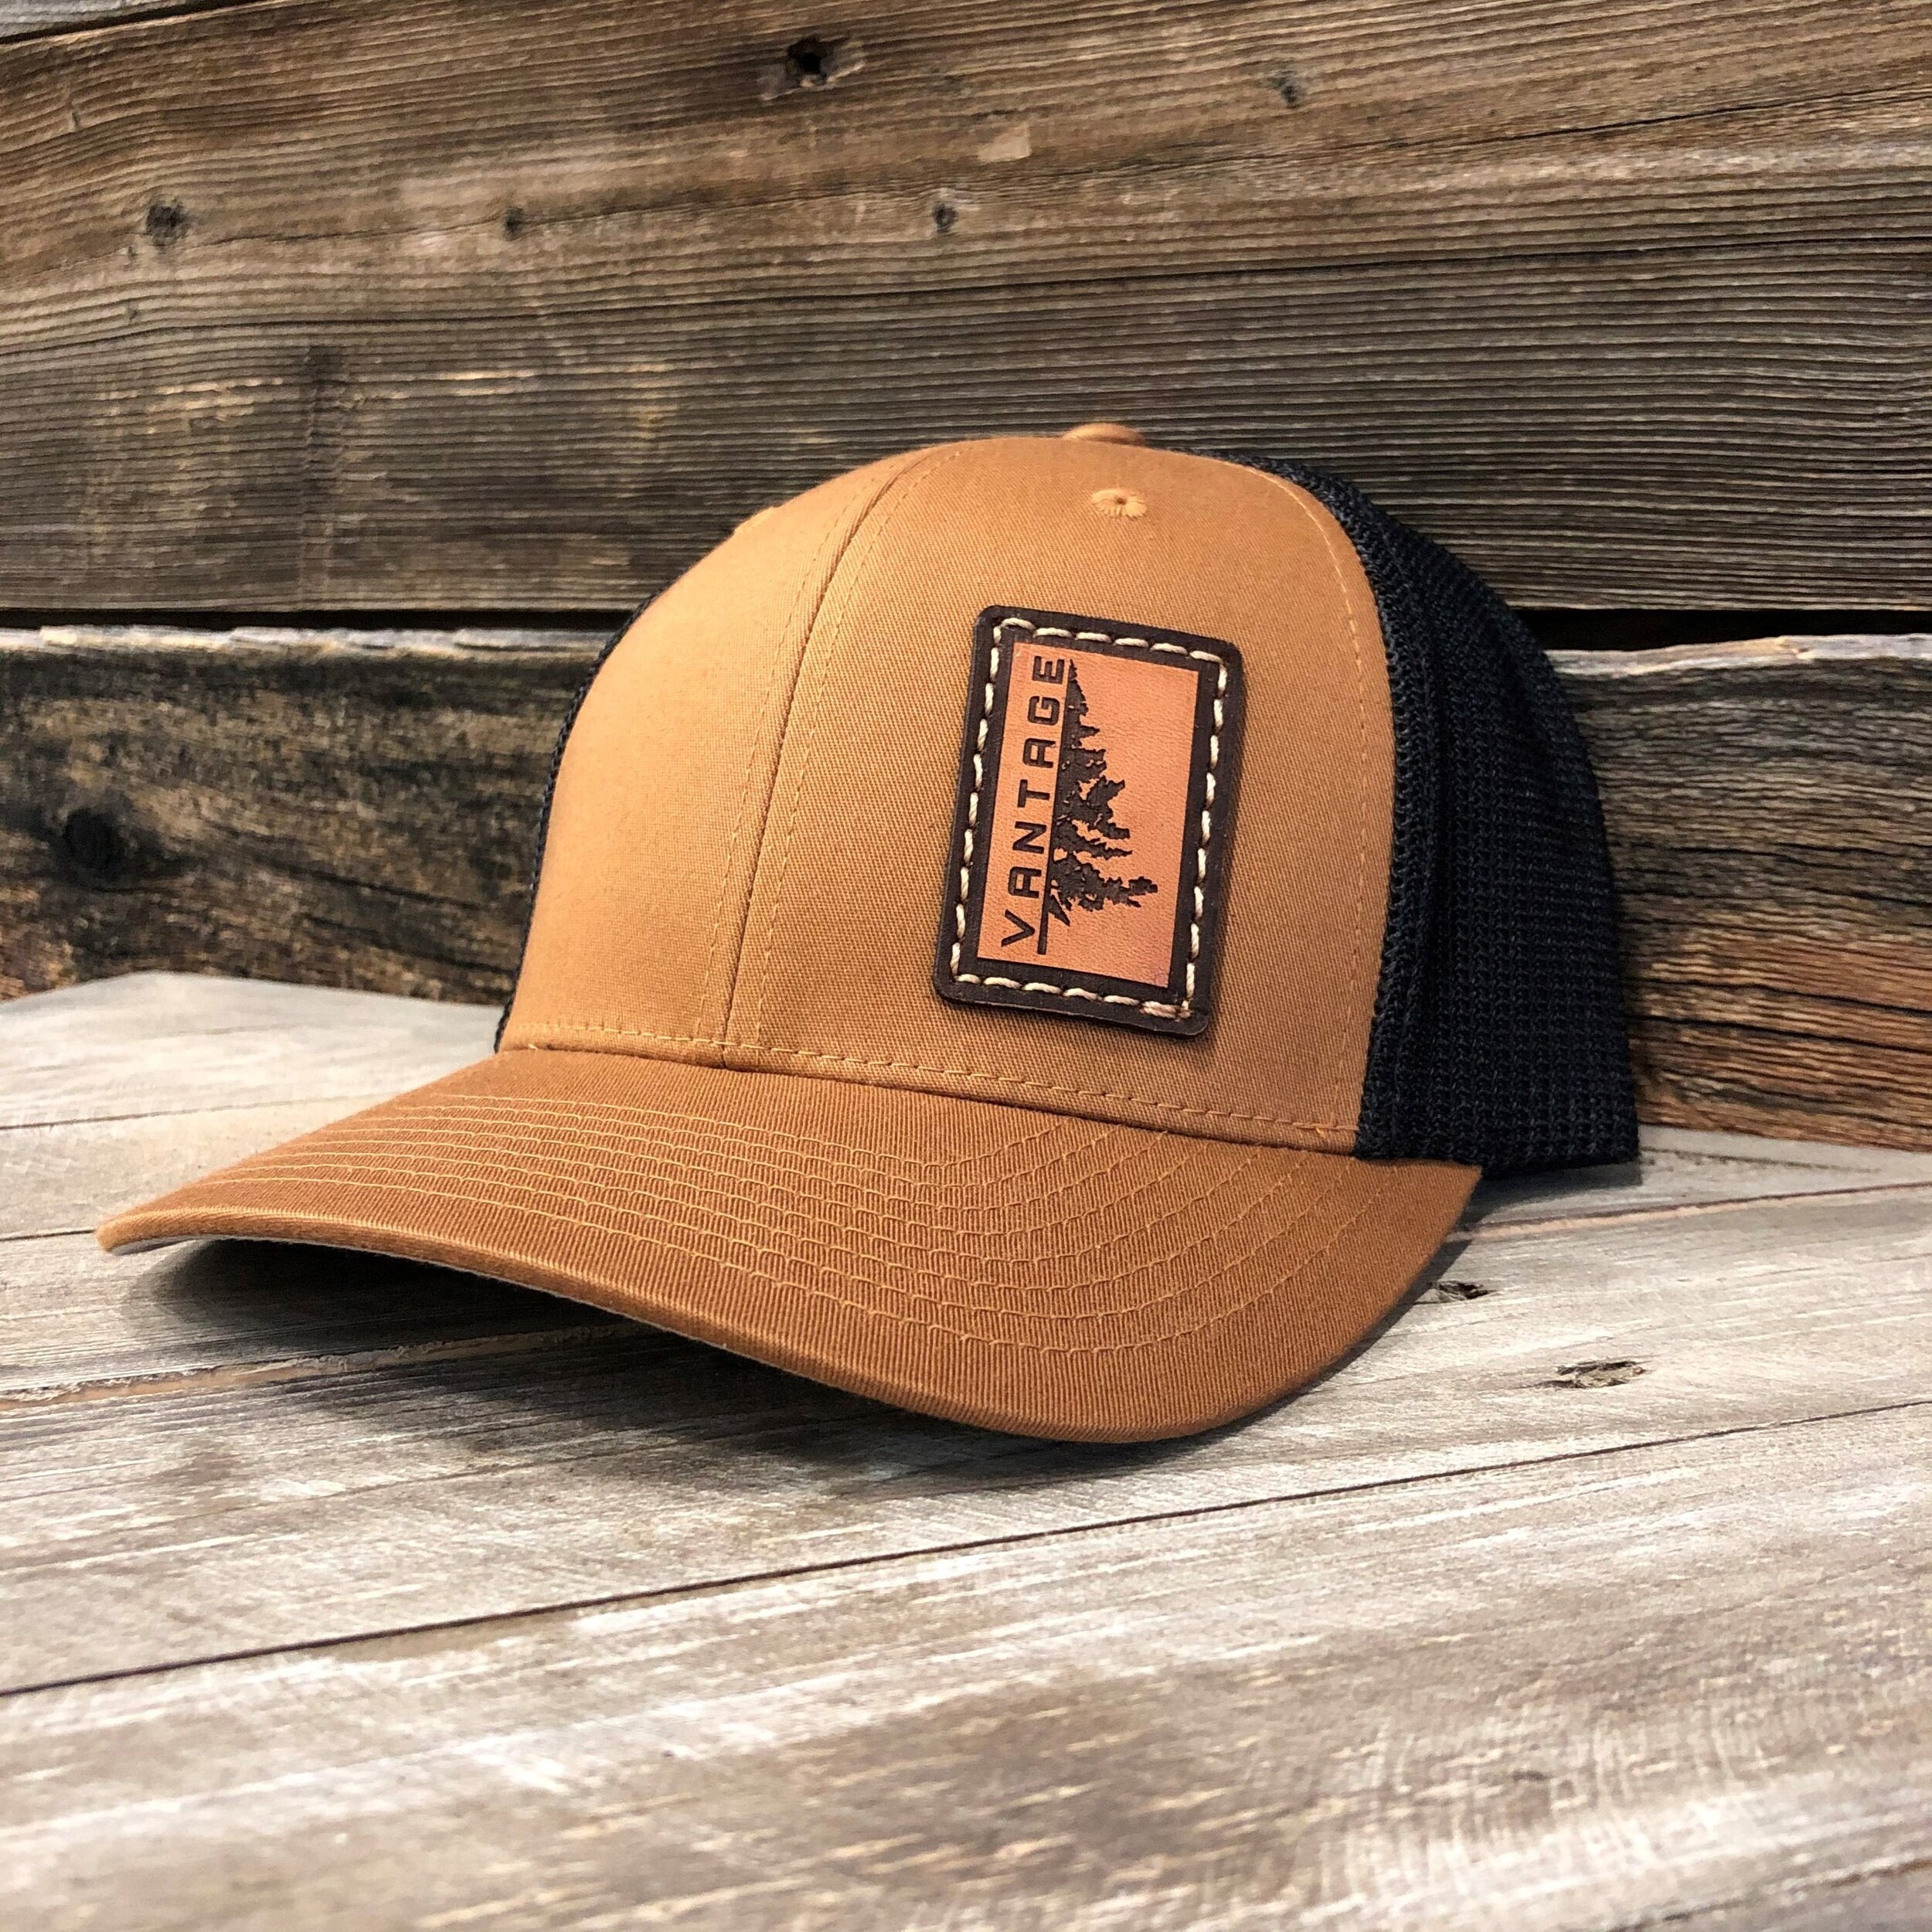 Maine Homegrown Black Patch Hat